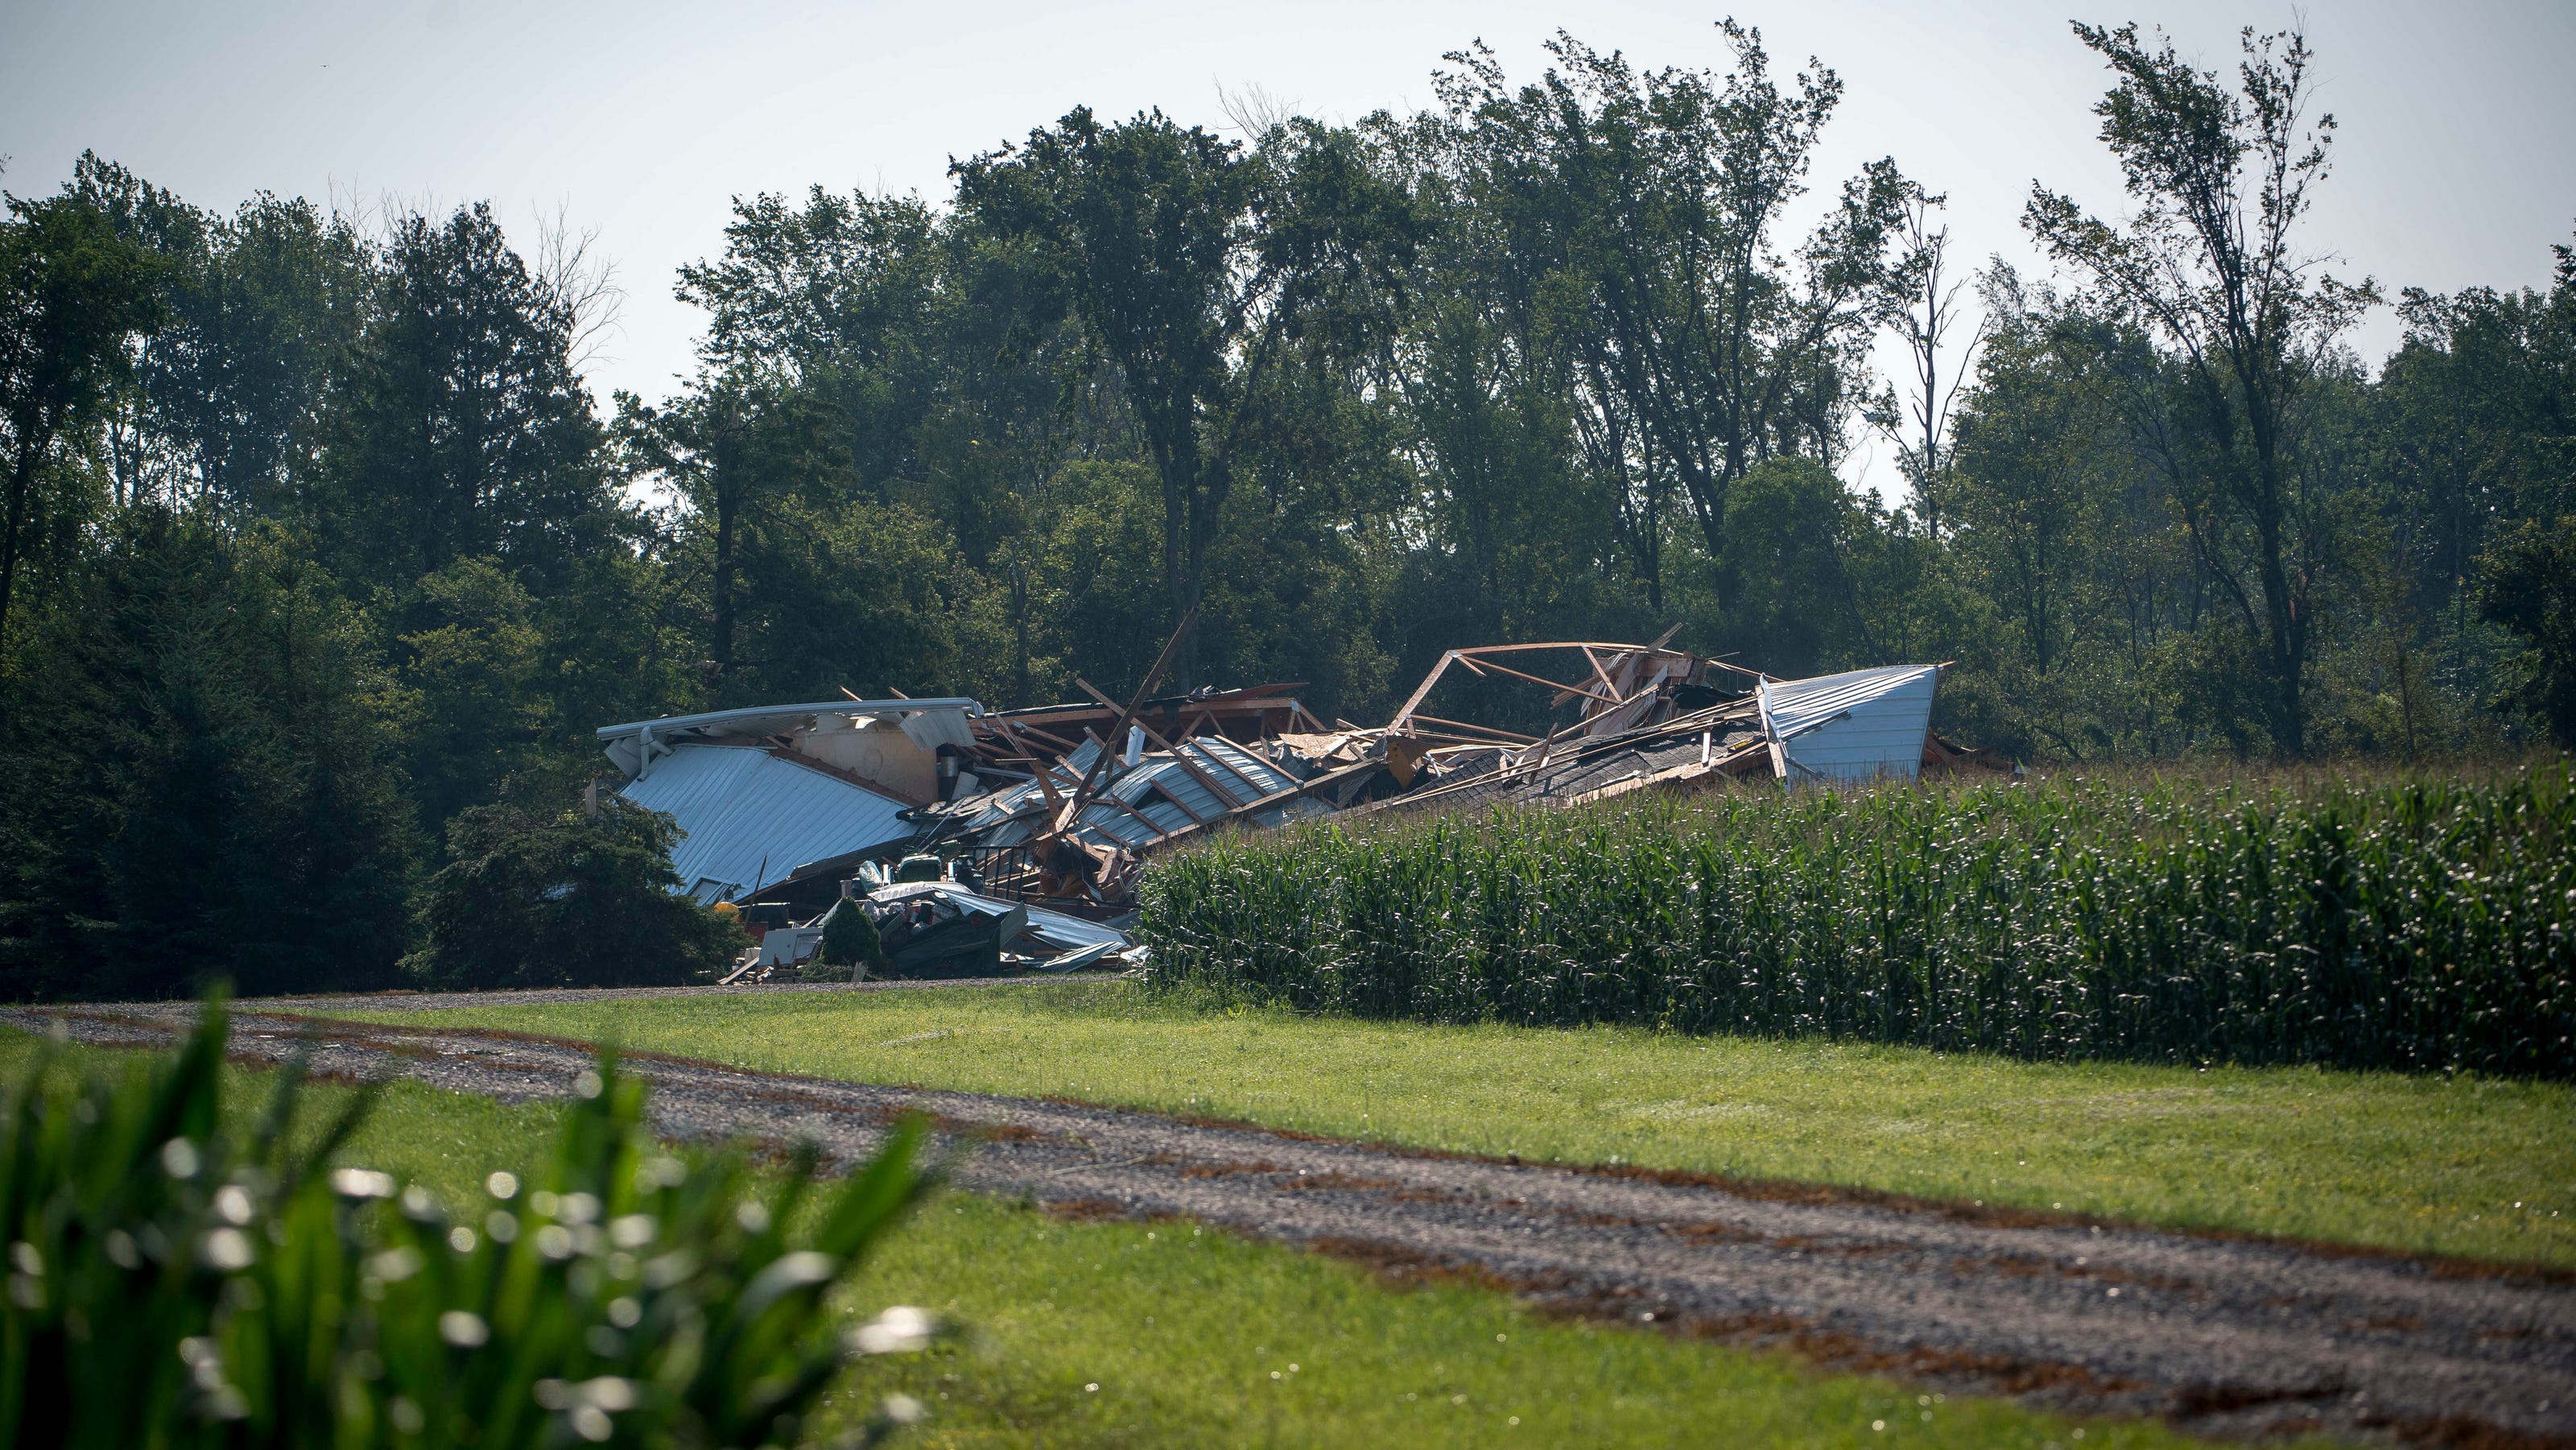 How many tornadoes does Michigan get per year? A look at last decade